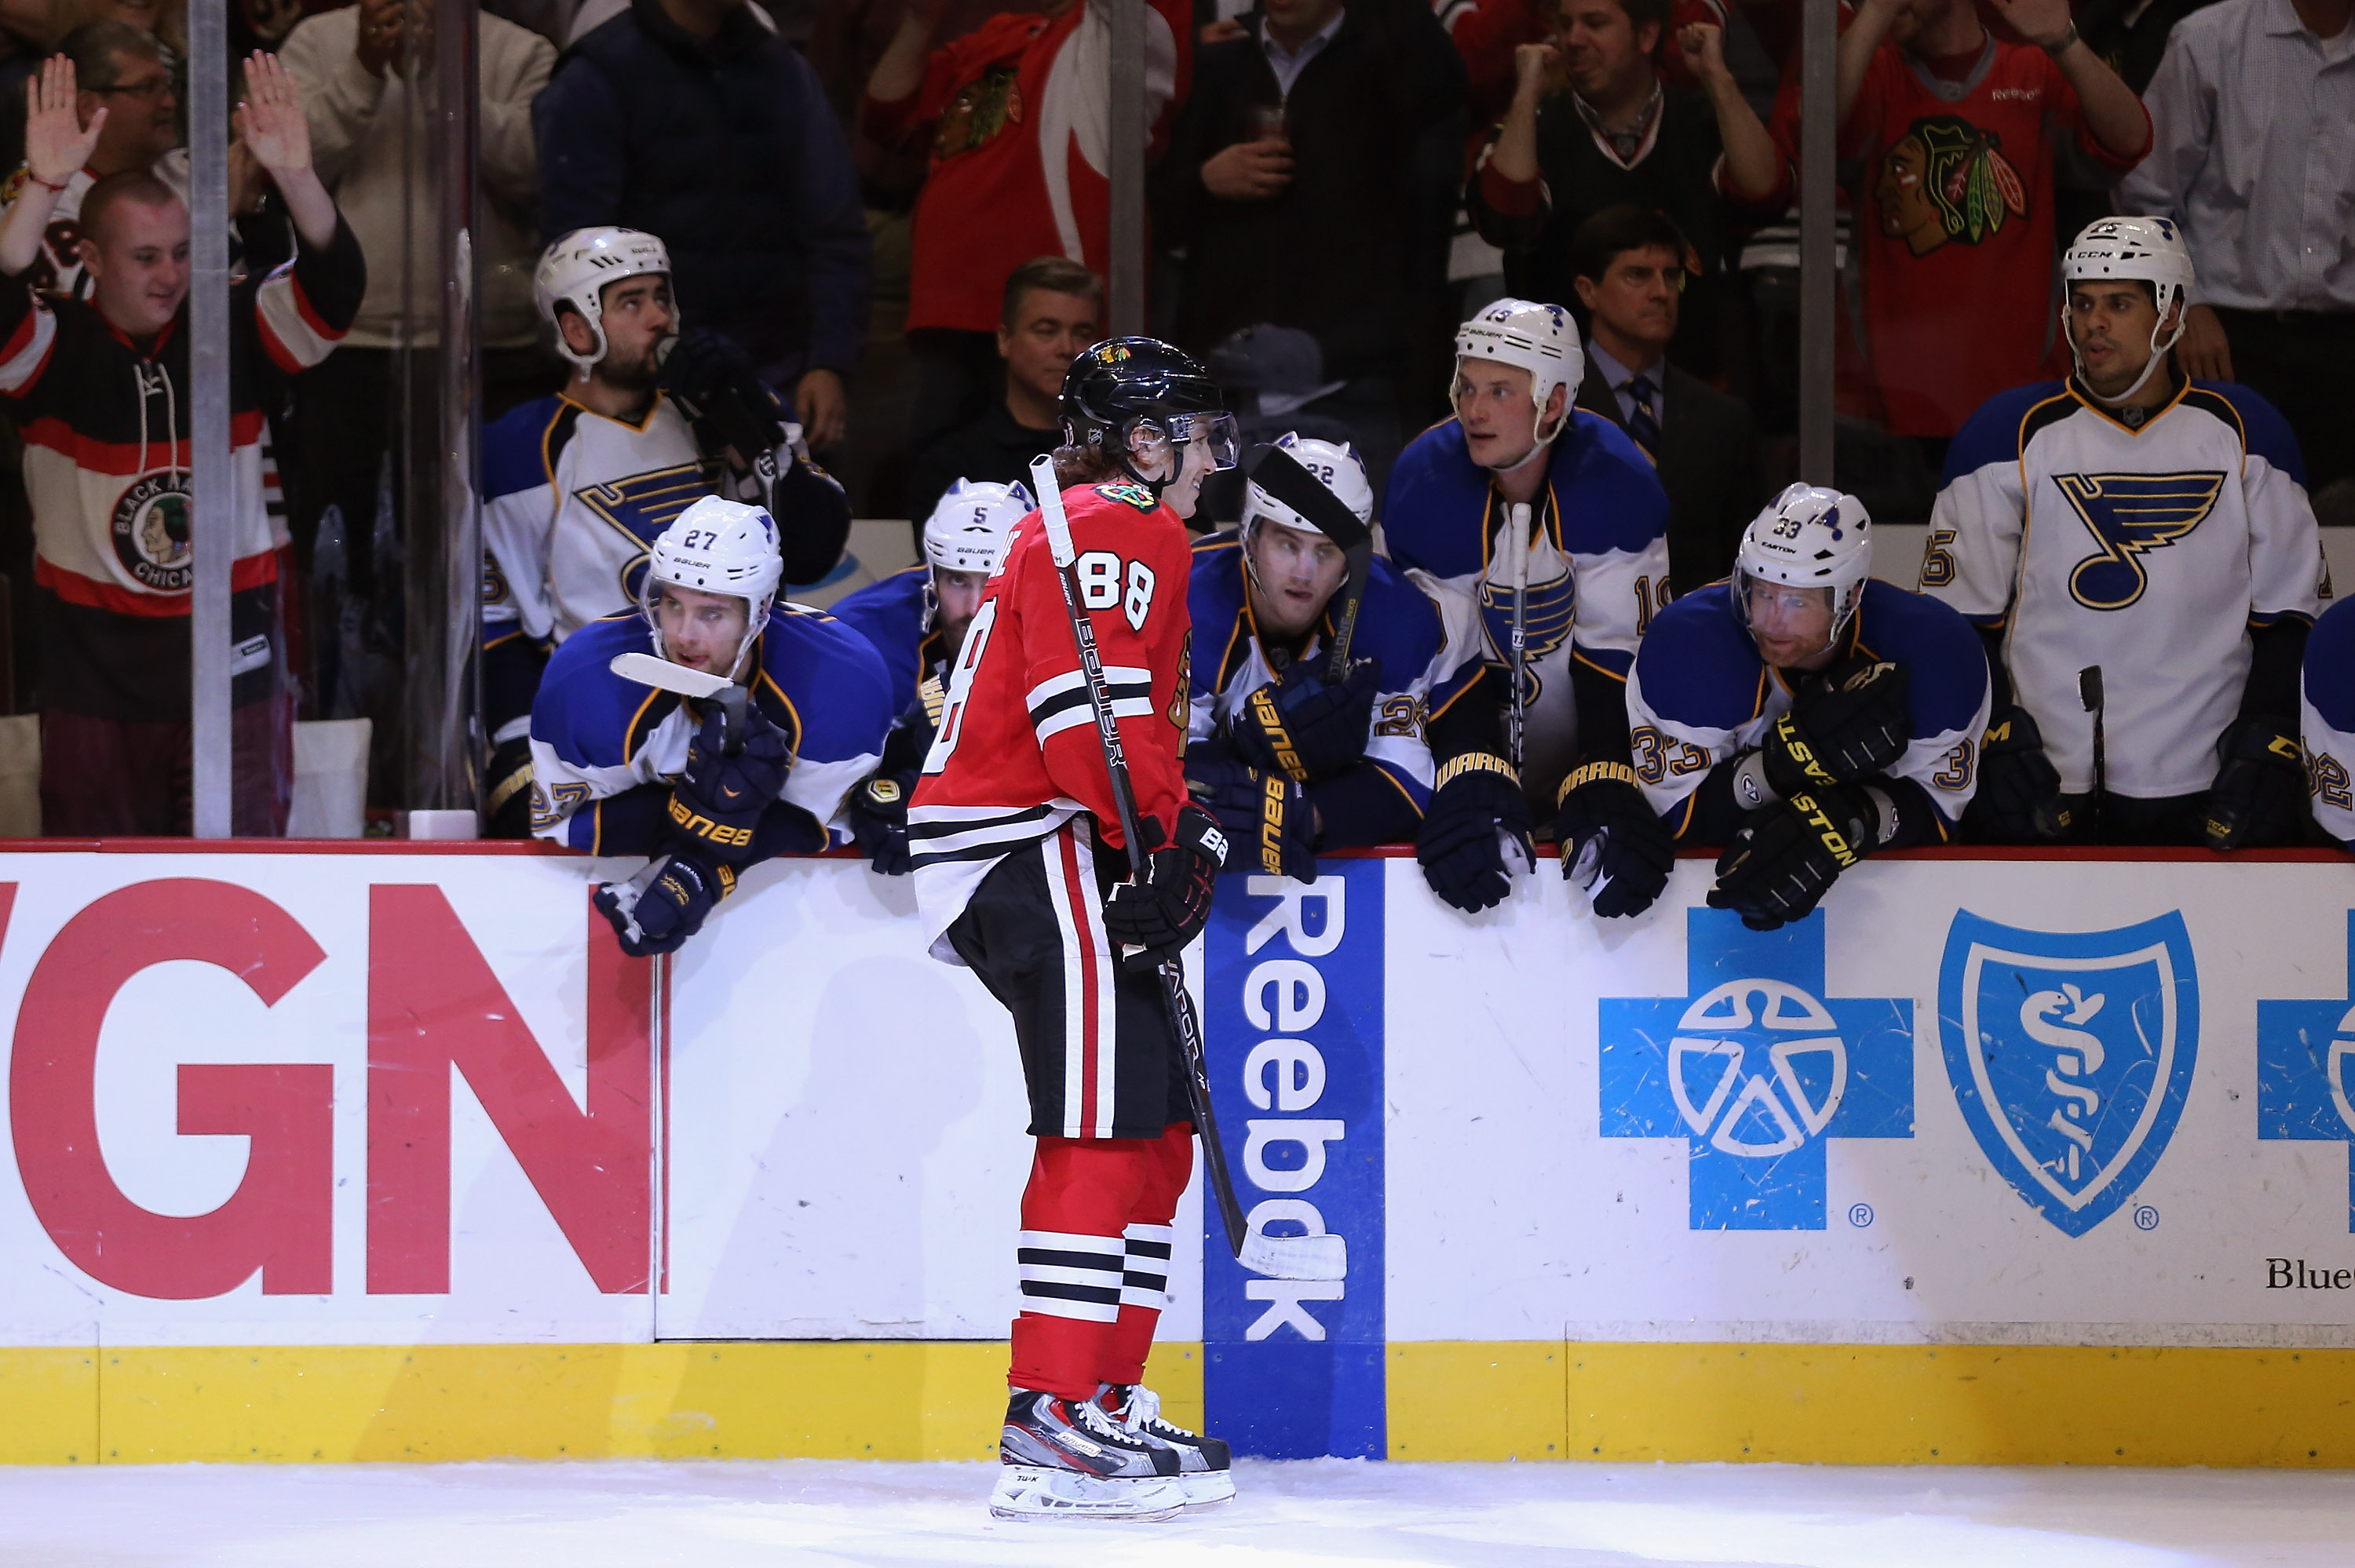 Devils beat lowly Blackhawks, move within 3 wins of crazy